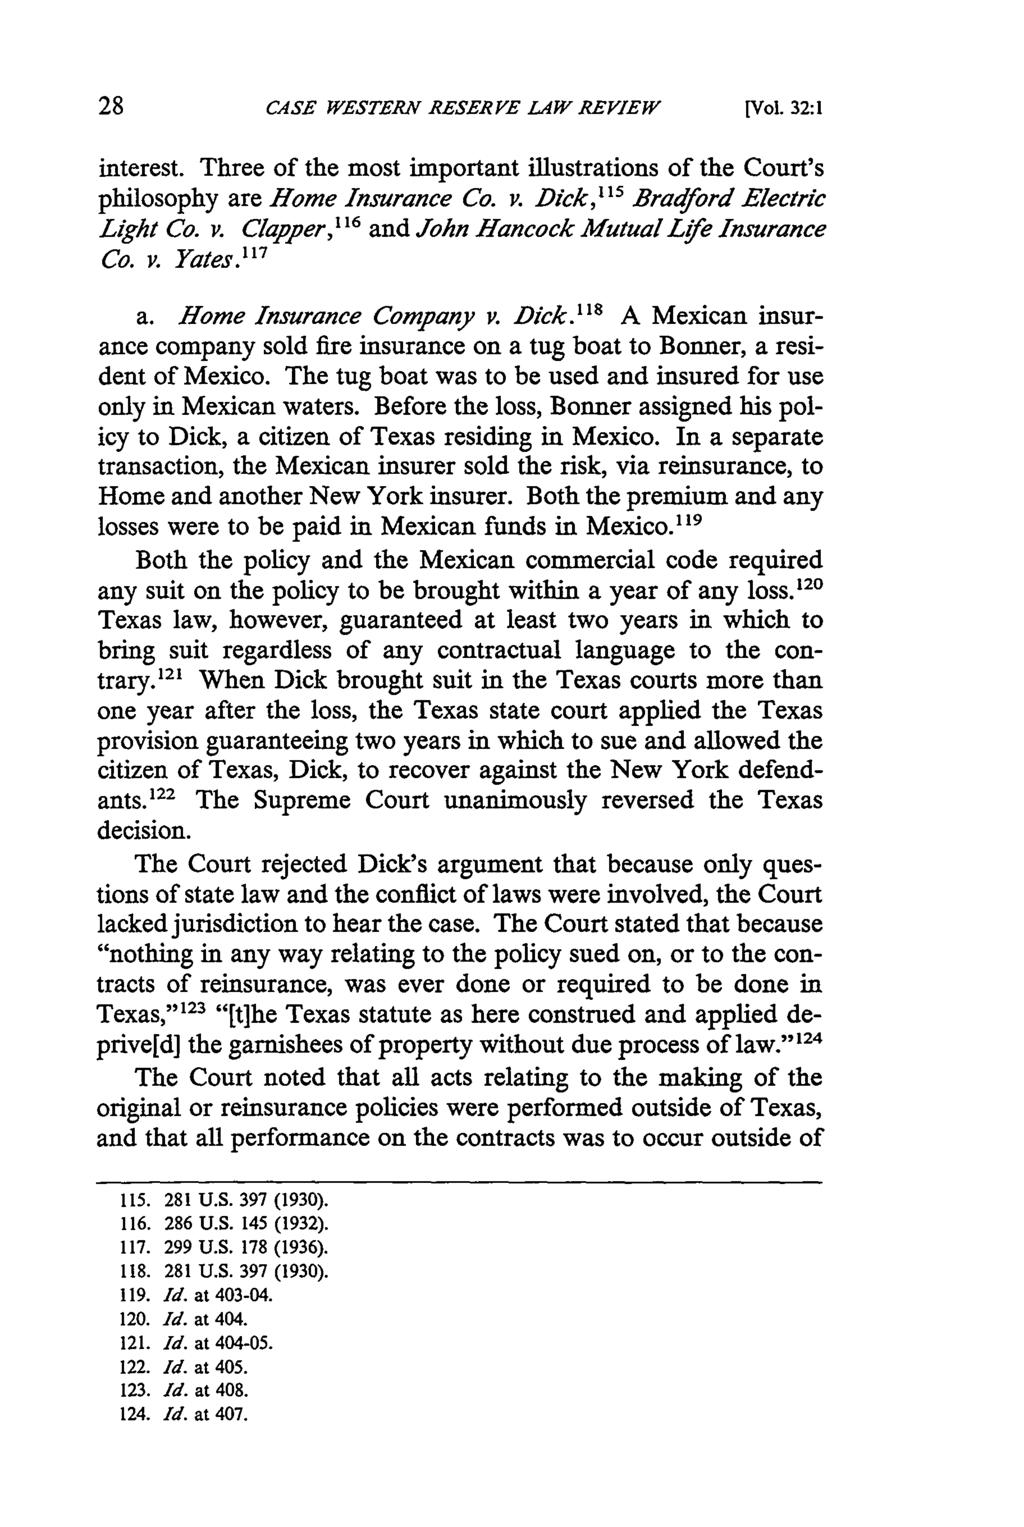 CASE WESTERN RESERVE LAW REVIEW [Vol 32:1 interest. Three of the most important illustrations of the Court's philosophy are Home Insurance Co. v. Dick, 1 15 Bradford Electric Light Co. v. Clapper," 6 and John Hancock Mutual Life Insurance Co.